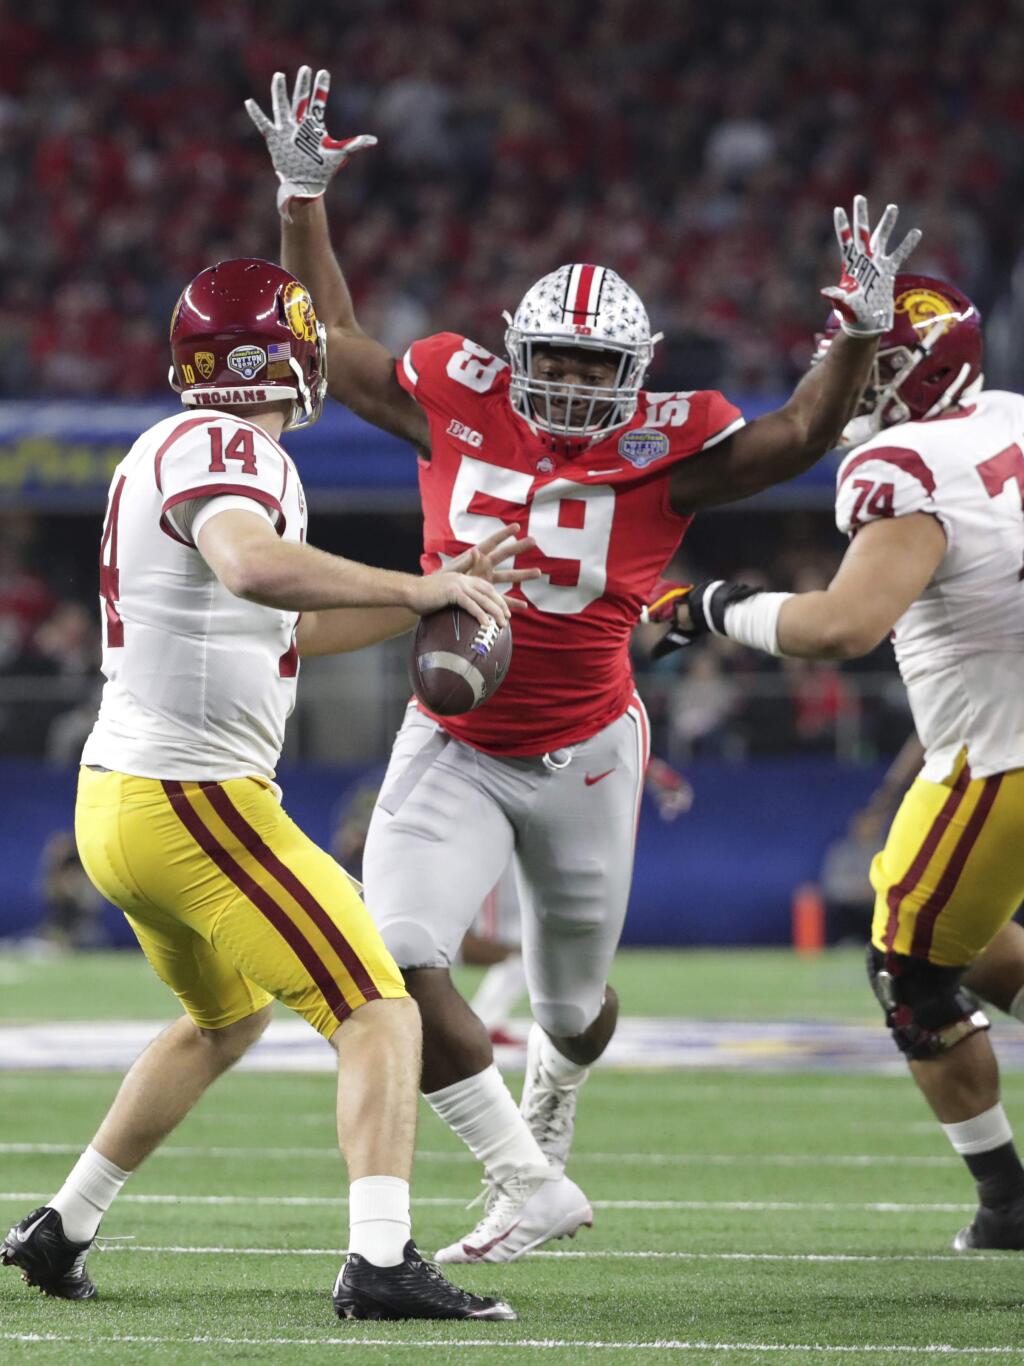 Ohio State defensive lineman Tyquan Lewis (59) closes in on Southern California quarterback Sam Darnold (14) during the first half of the Cotton Bowl NCAA college football game in Arlington, Texas, Friday, Dec. 29, 2017. (AP Photo/LM Otero)